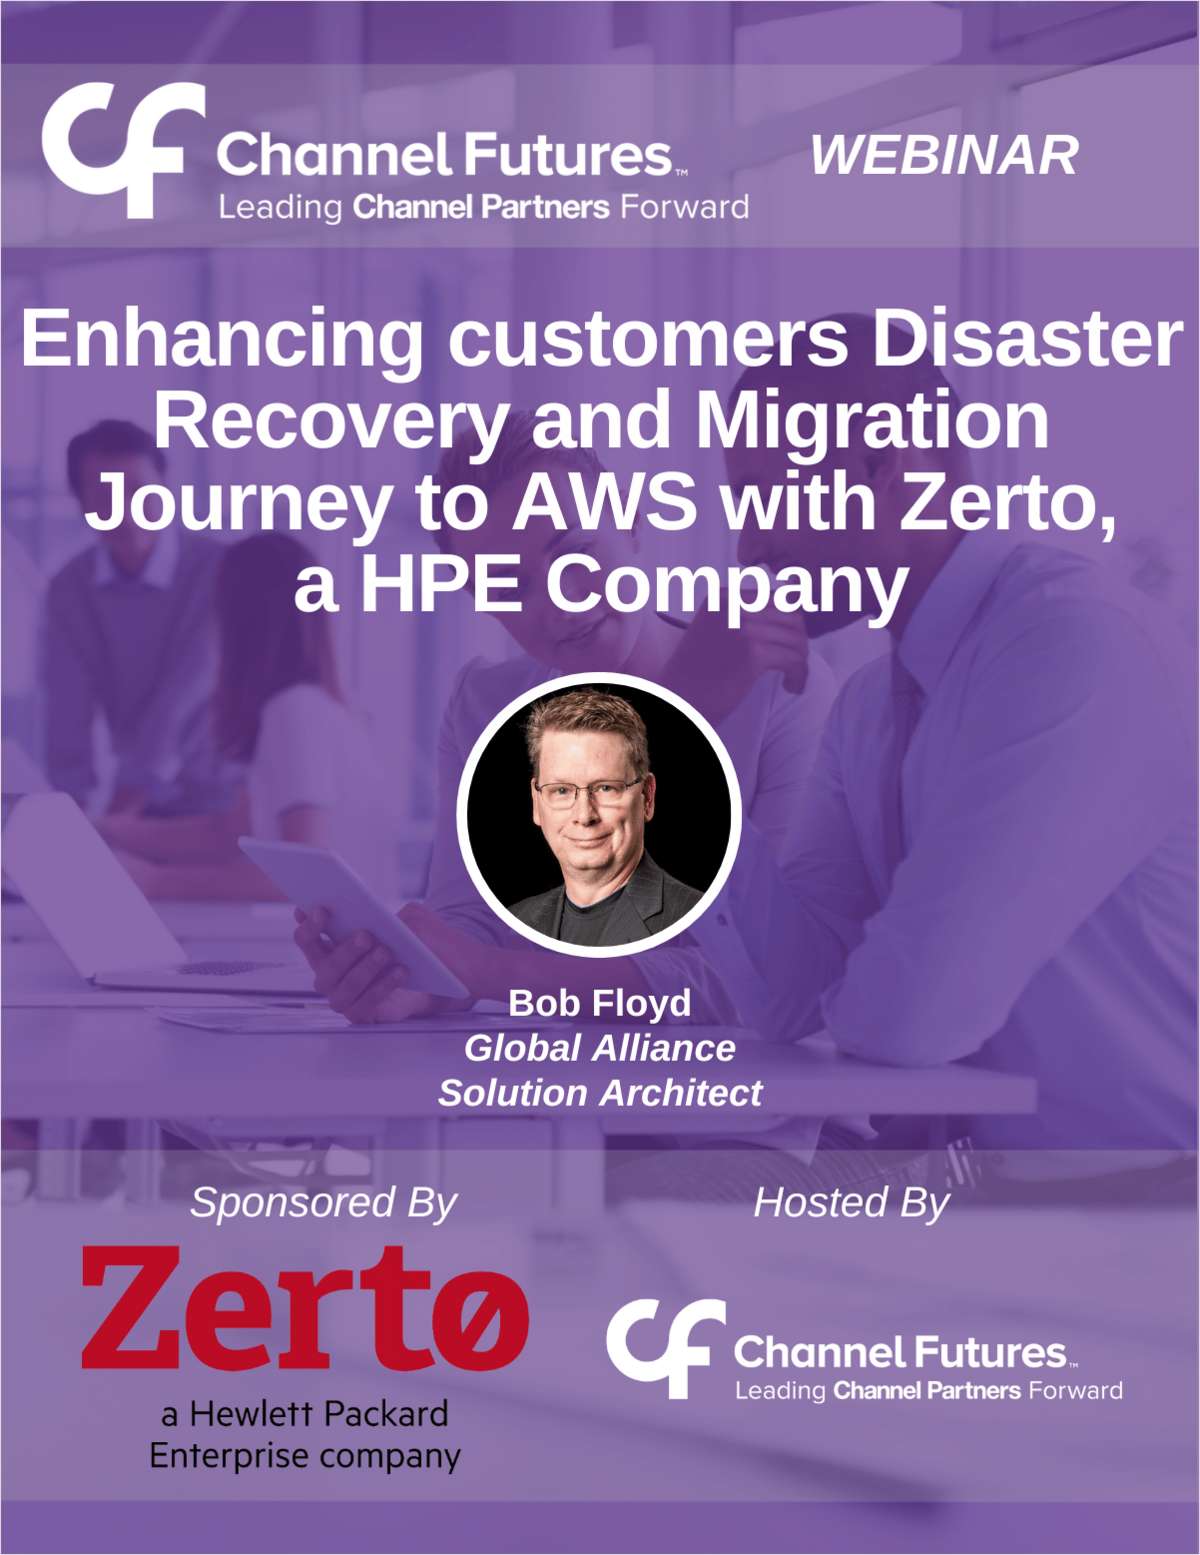 Enhancing Customers' Disaster Recovery and Migration Journey to AWS with Zerto, an HPE Company